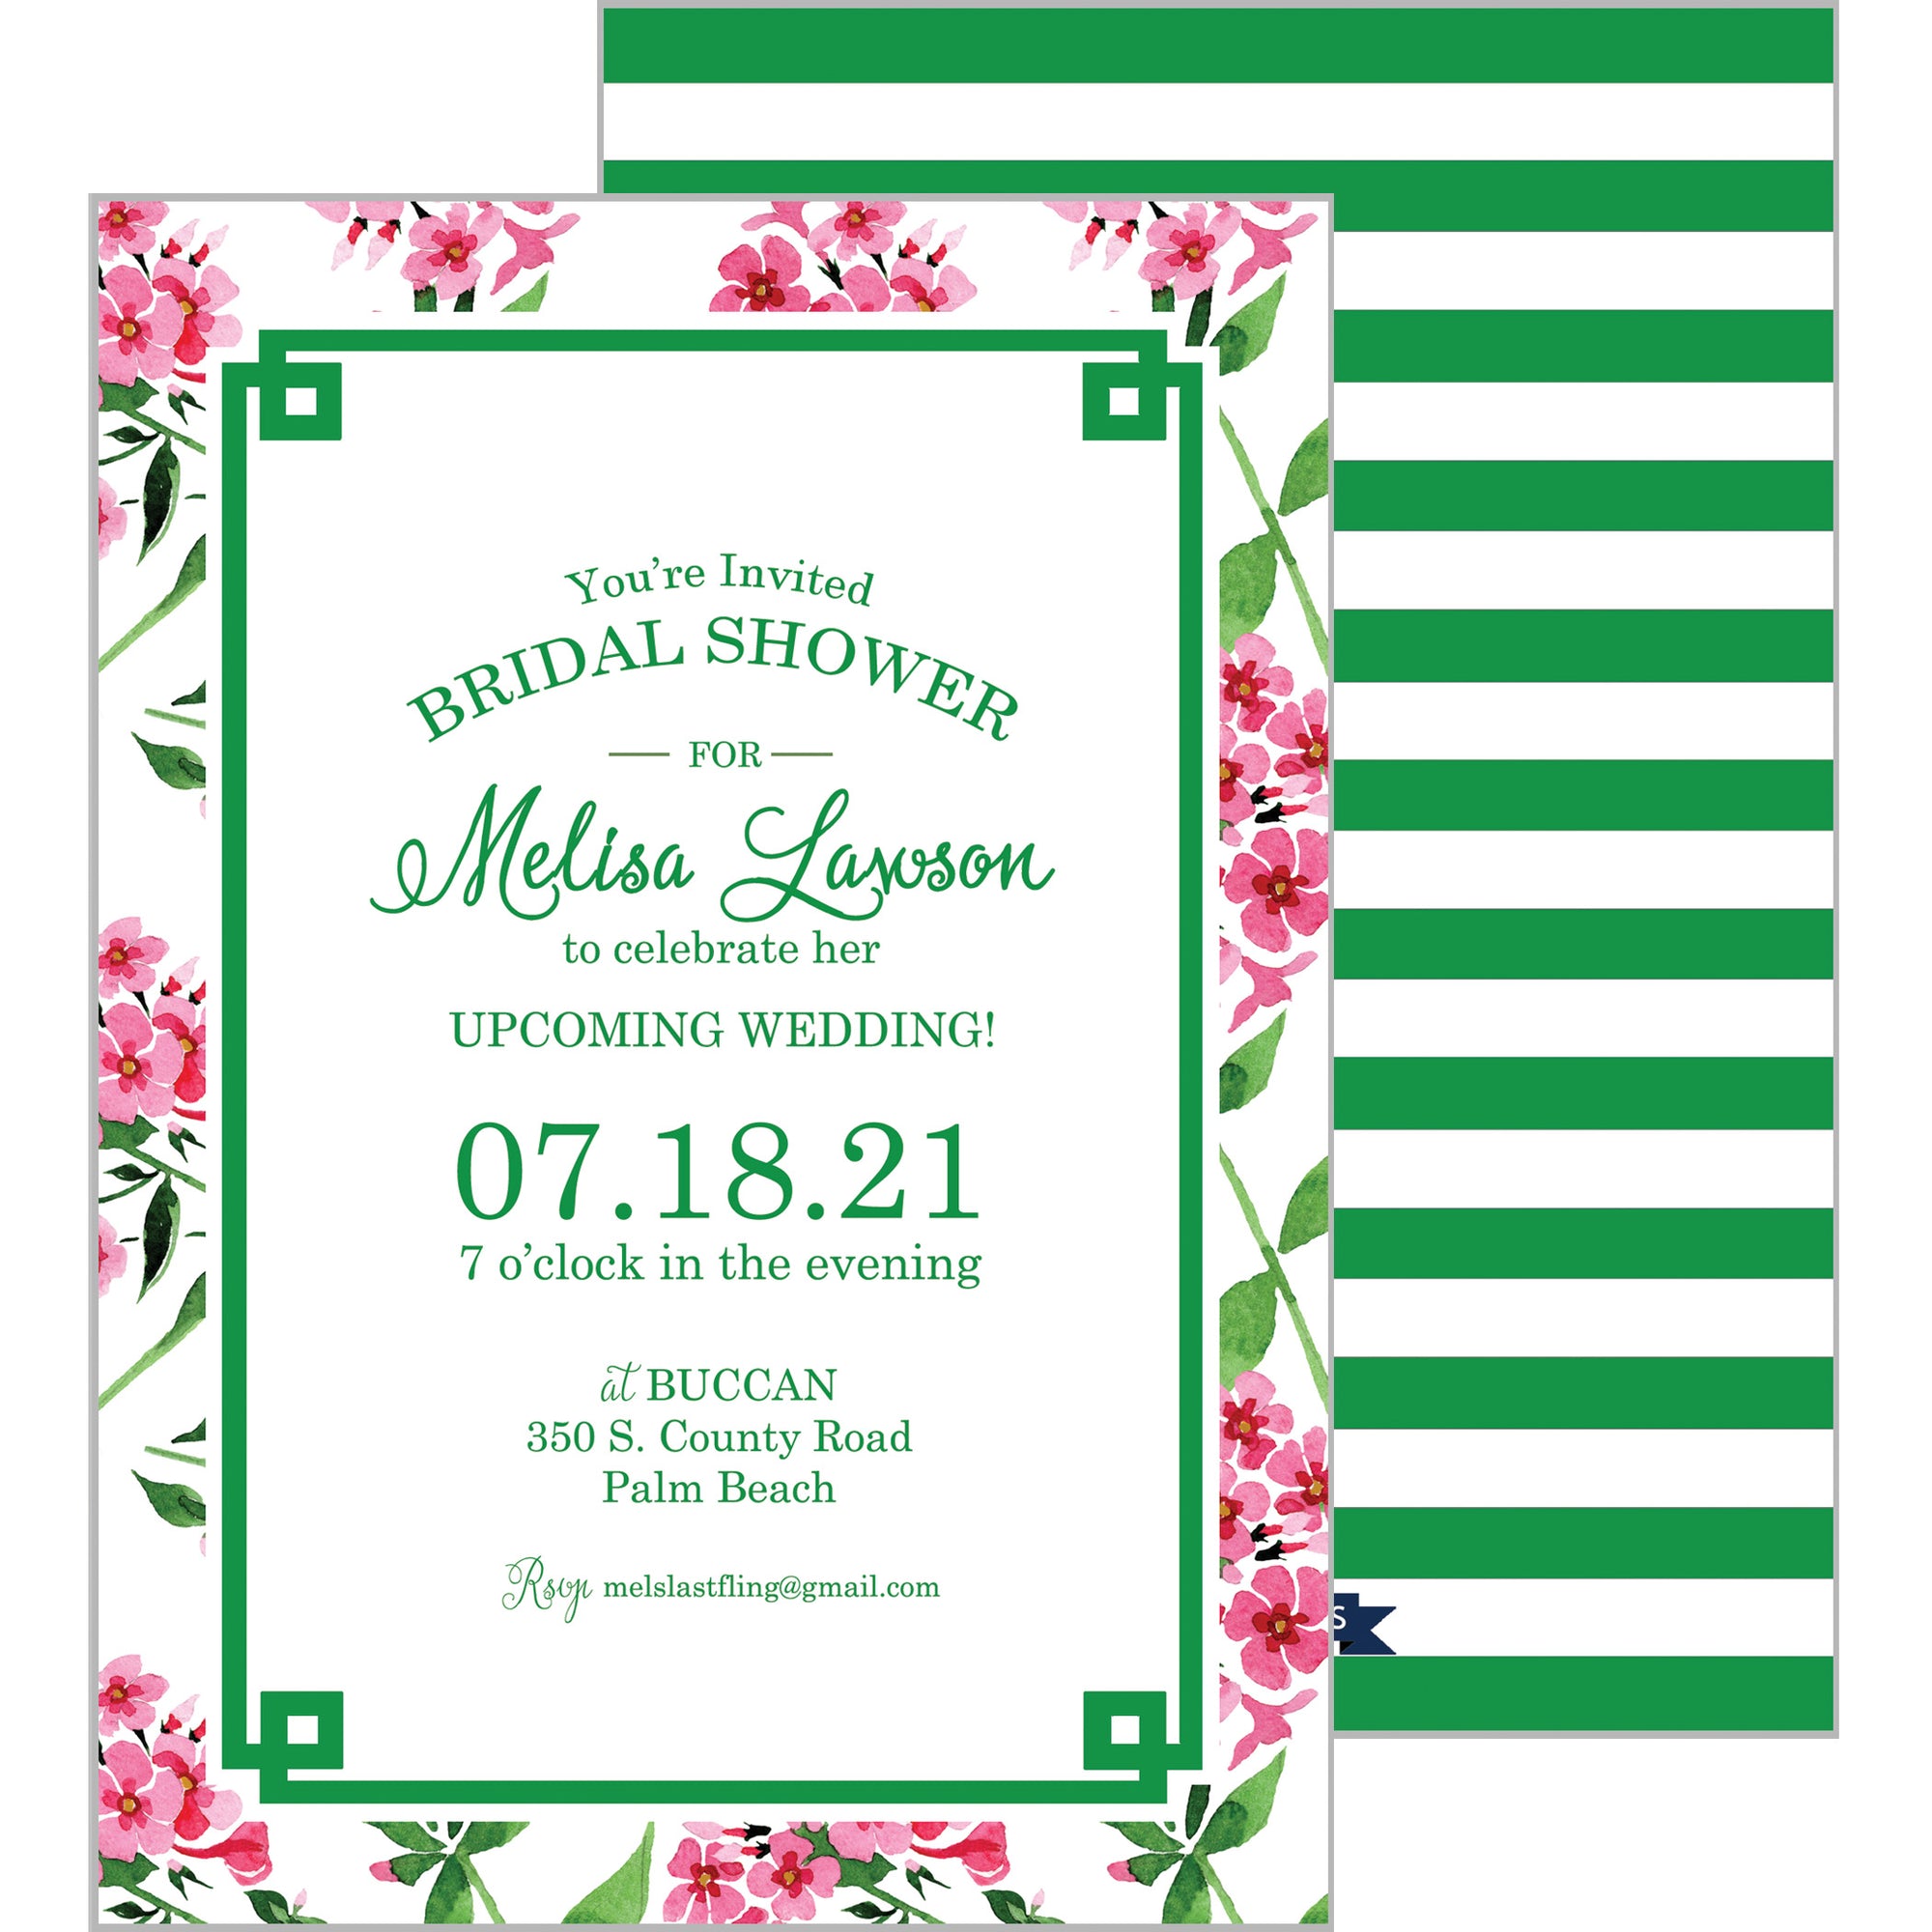 Pink and Green Floral Pattern Party Invitation